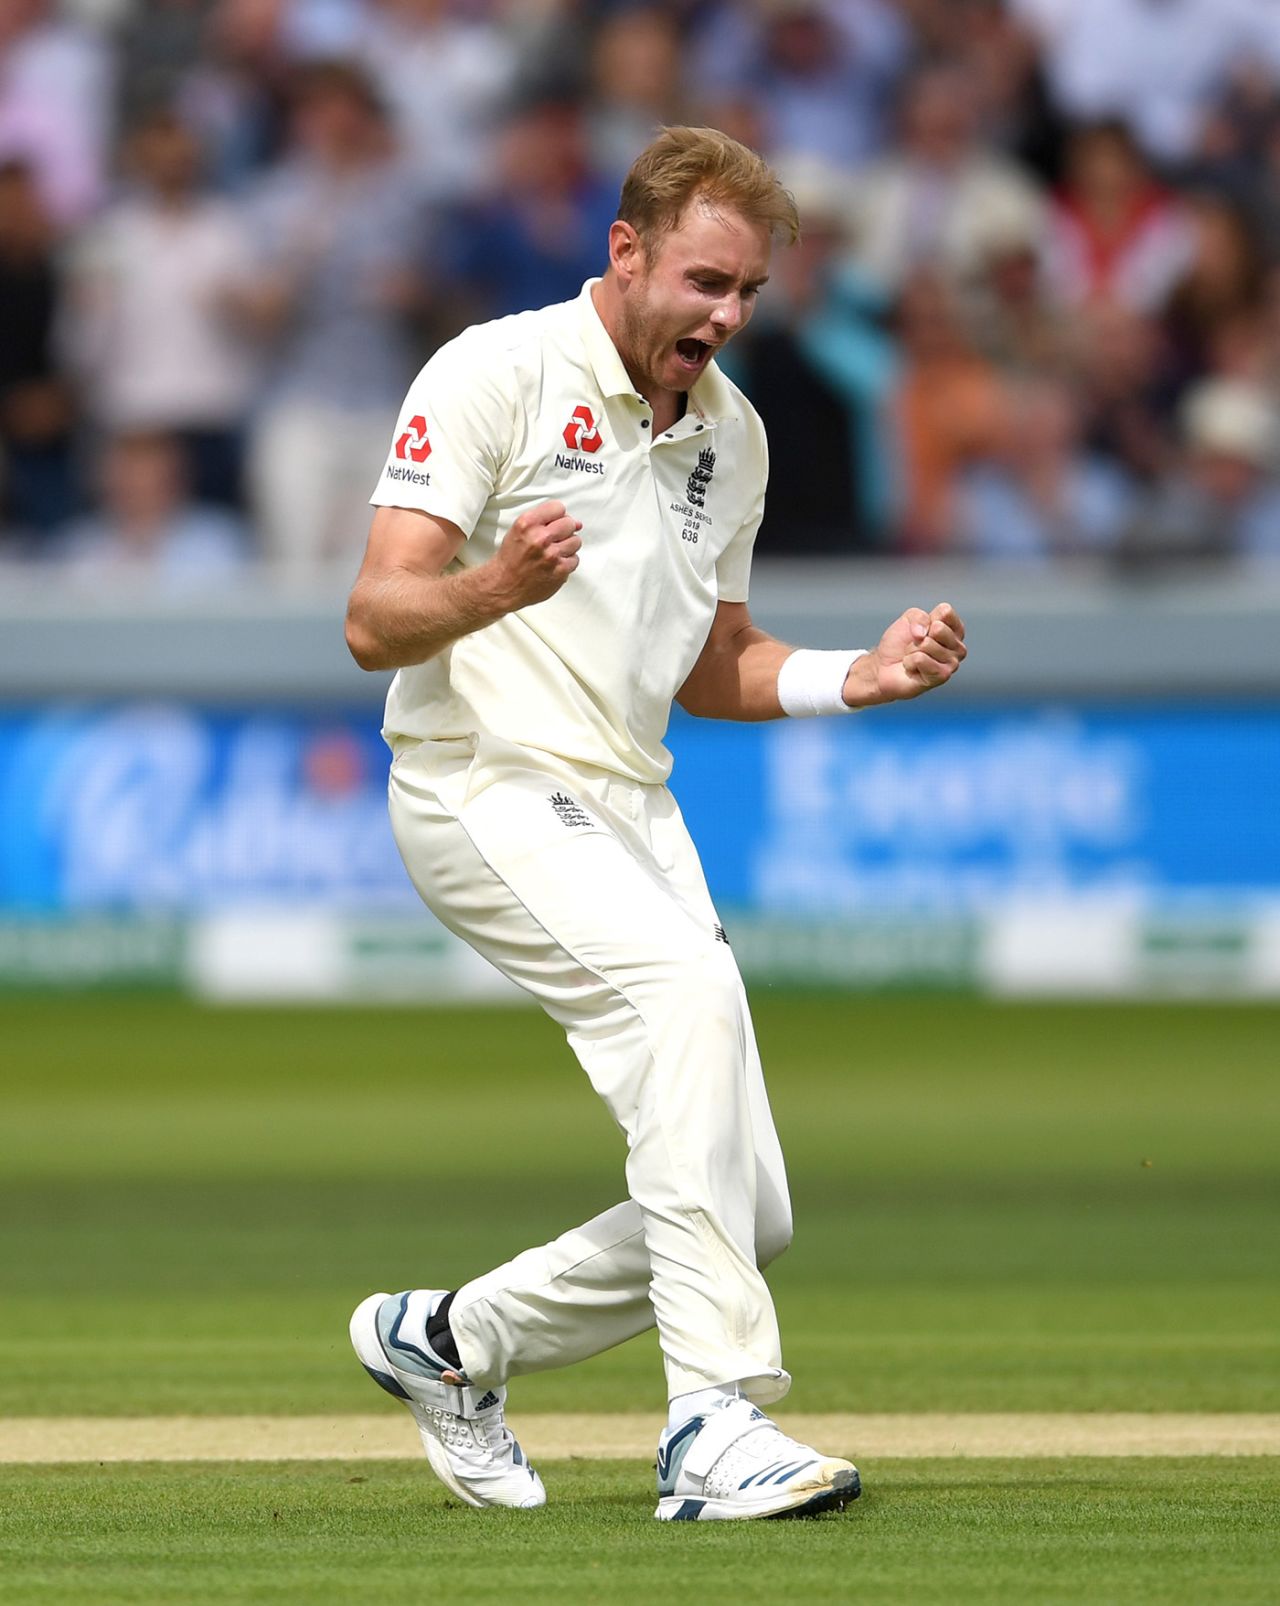 Stuart Broad roars in celebration, England v Australia, 2nd Test, Lord's, 4th day, August 17, 2019